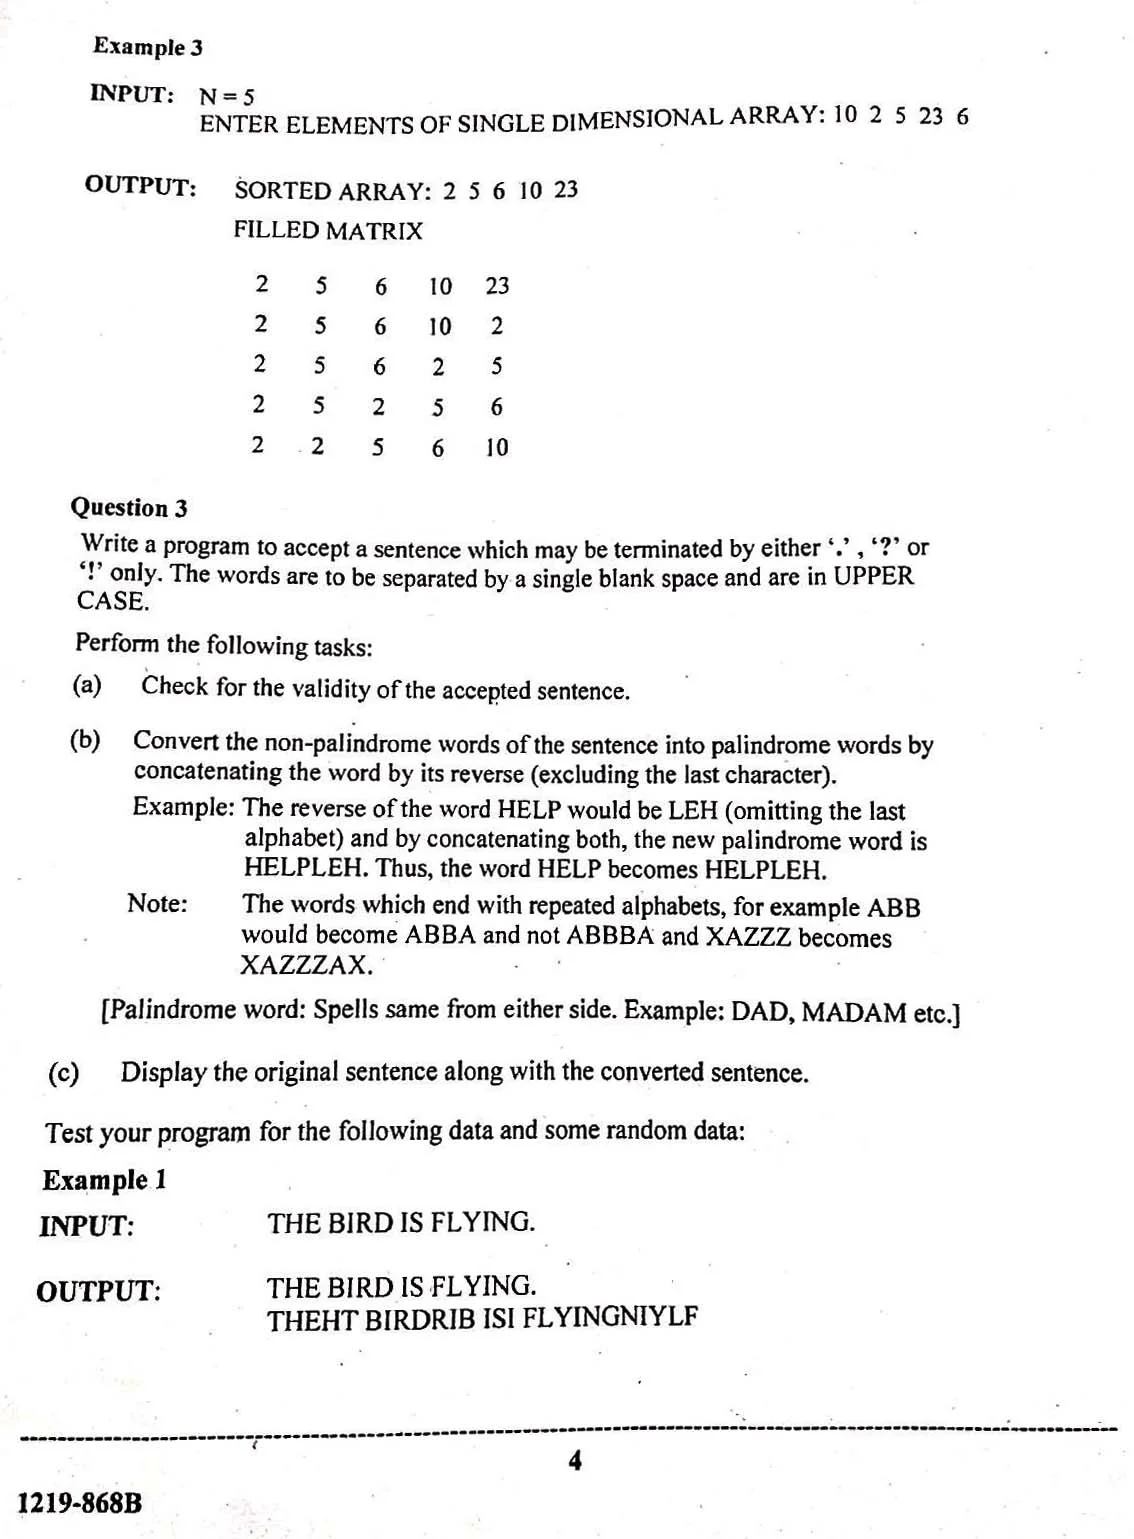 ISC Class 12 Computer Science Practical 2019 Question Paper